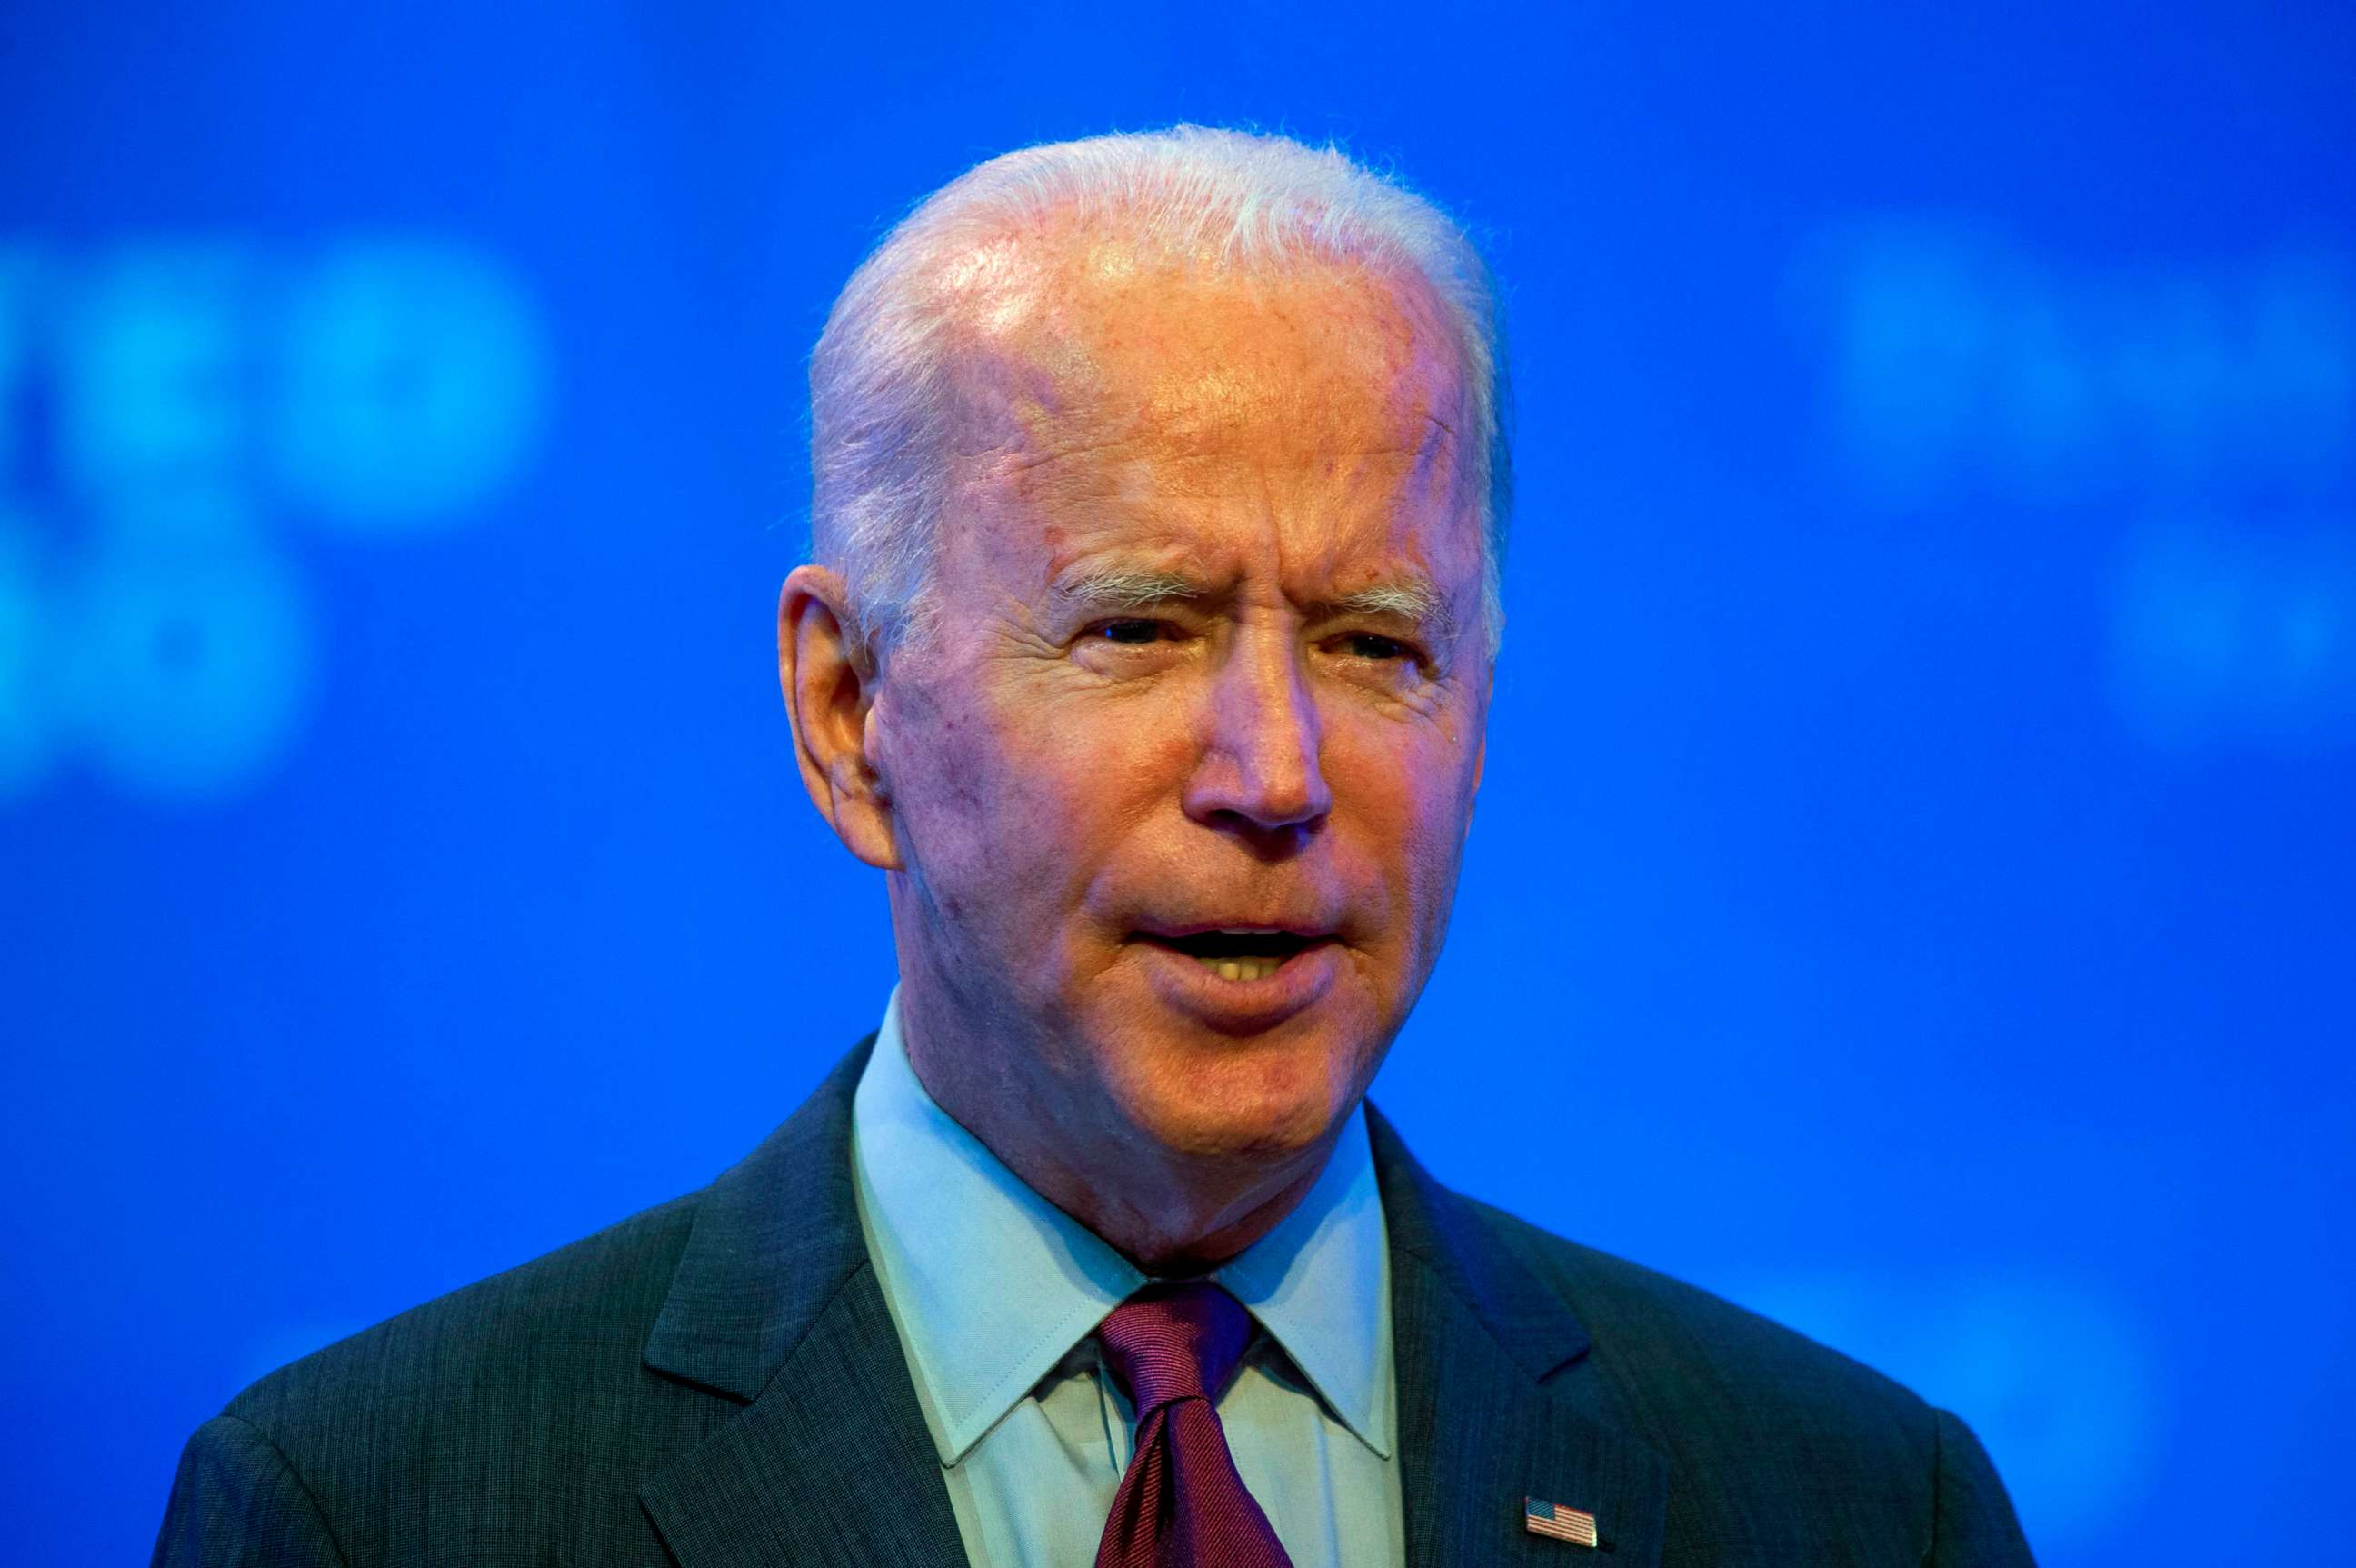 PHOTO: Democratic presidential nominee and former Vice President Joe Biden delivers a speech at a local theater in Wilmington, Delaware, Sept. 27, 2020.